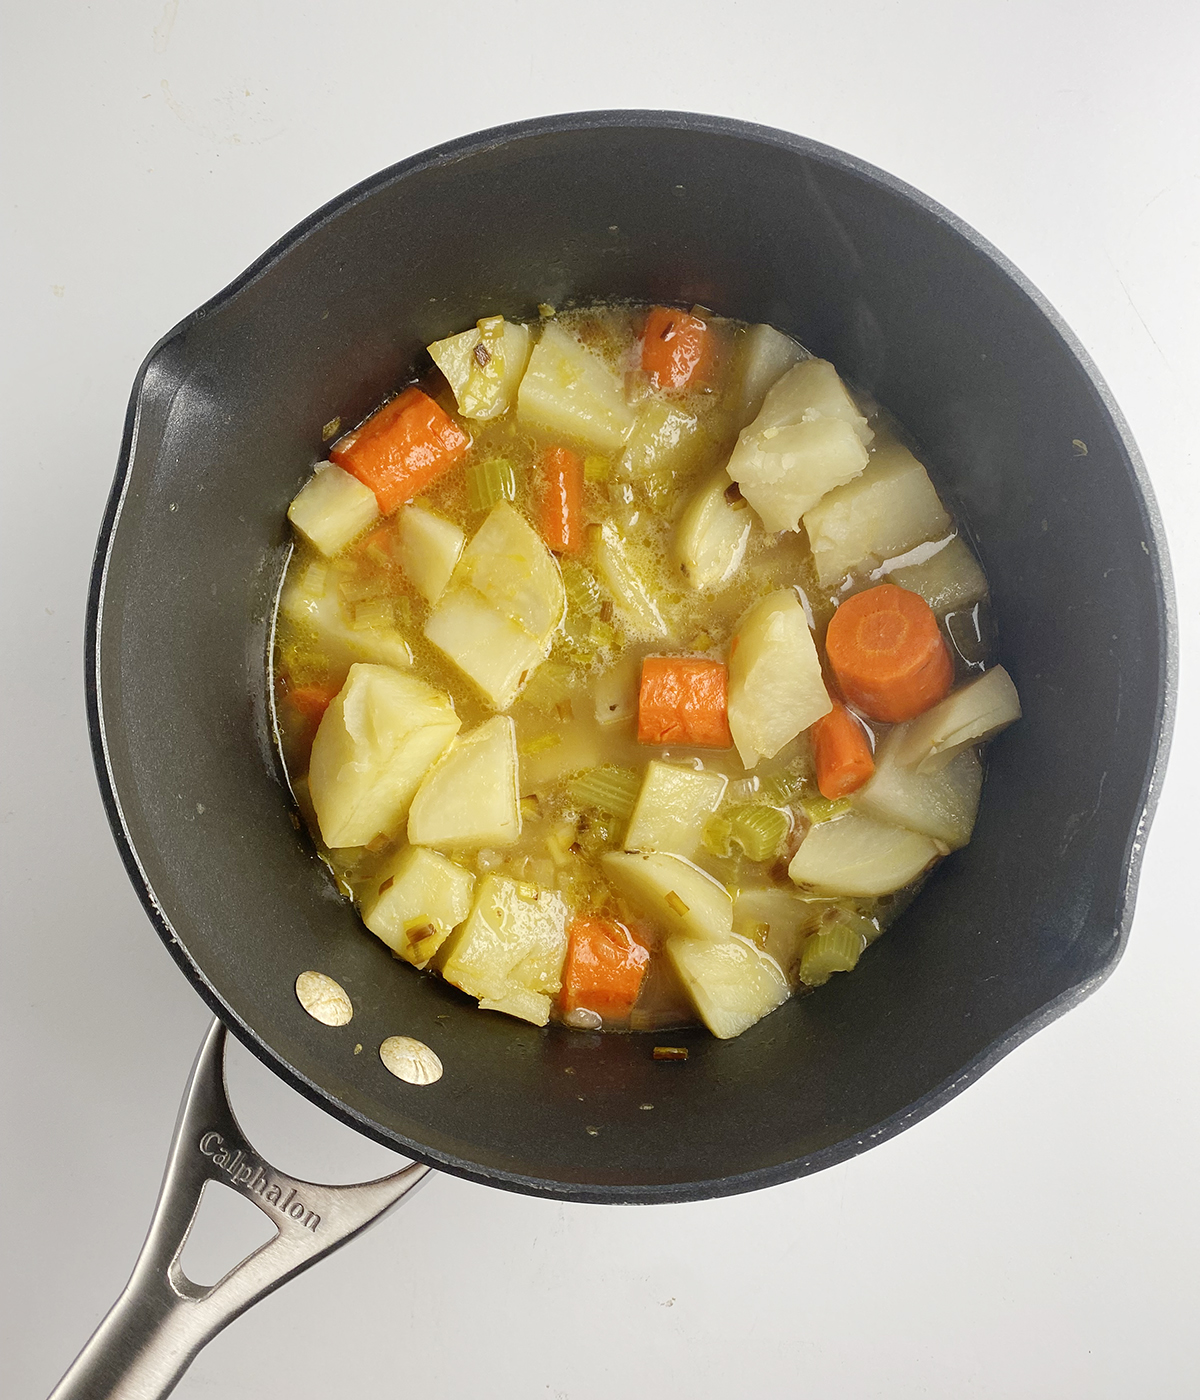 Cooked vegetables in a pot with broth.